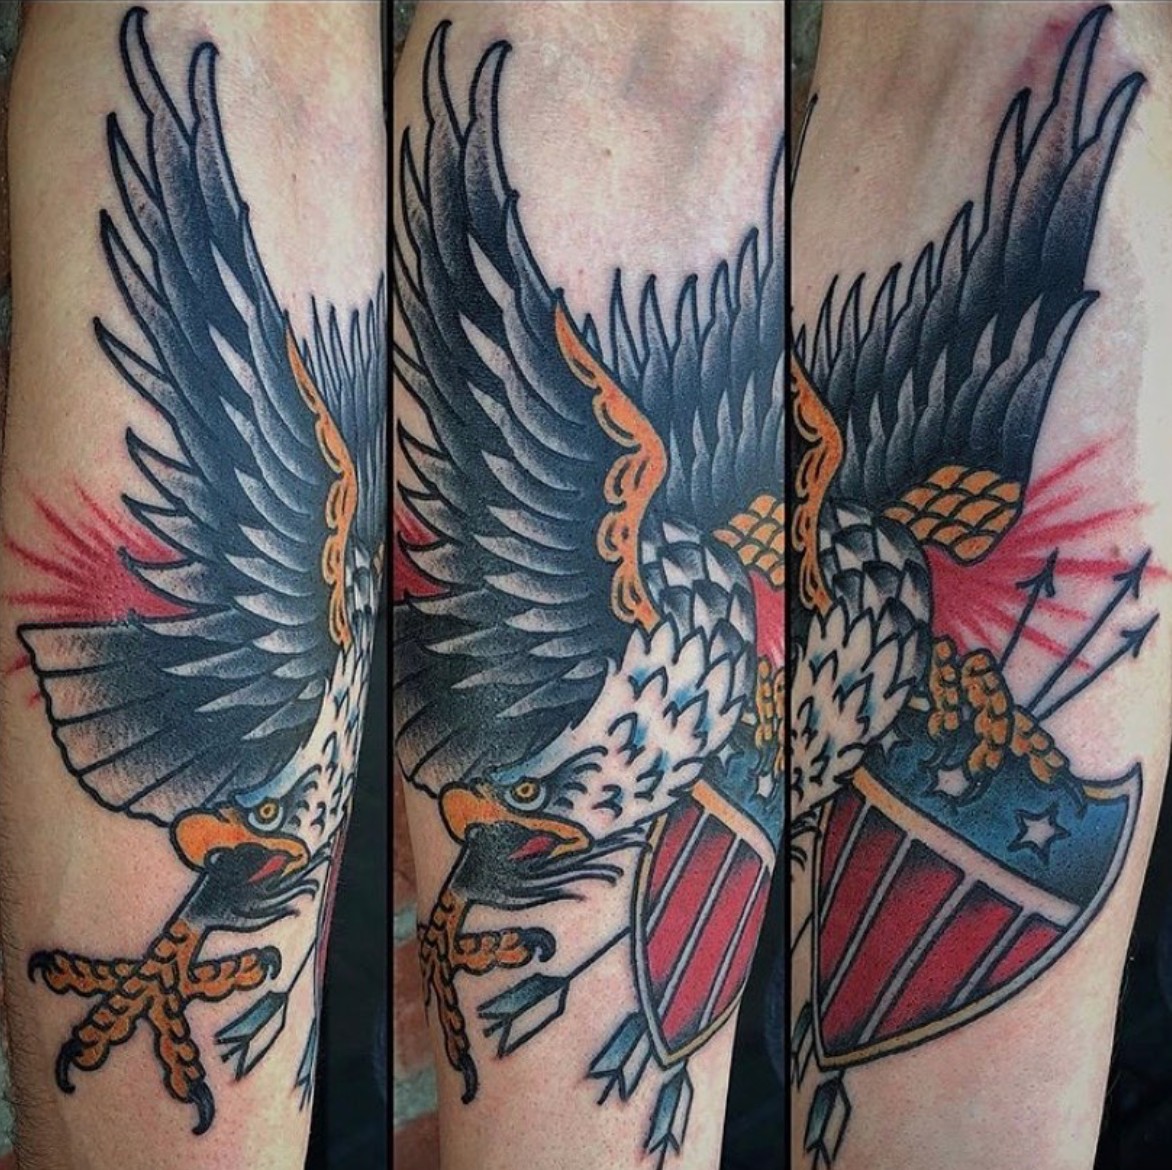 Military Tattoos | History | Above All Tattoo - Pacific Beach